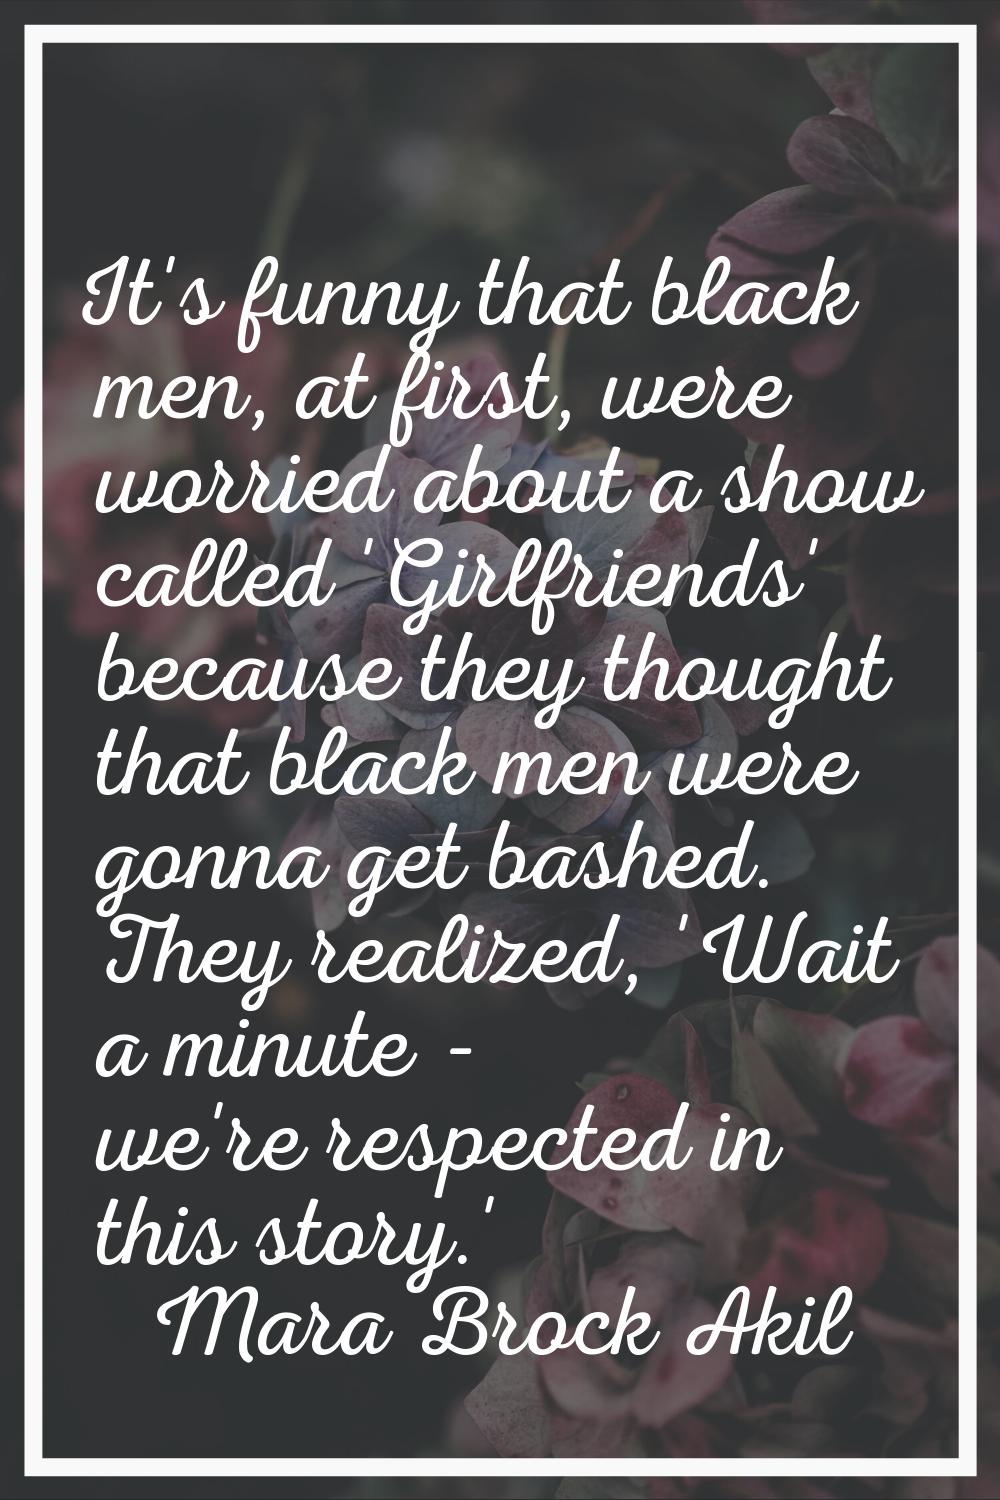 It's funny that black men, at first, were worried about a show called 'Girlfriends' because they th